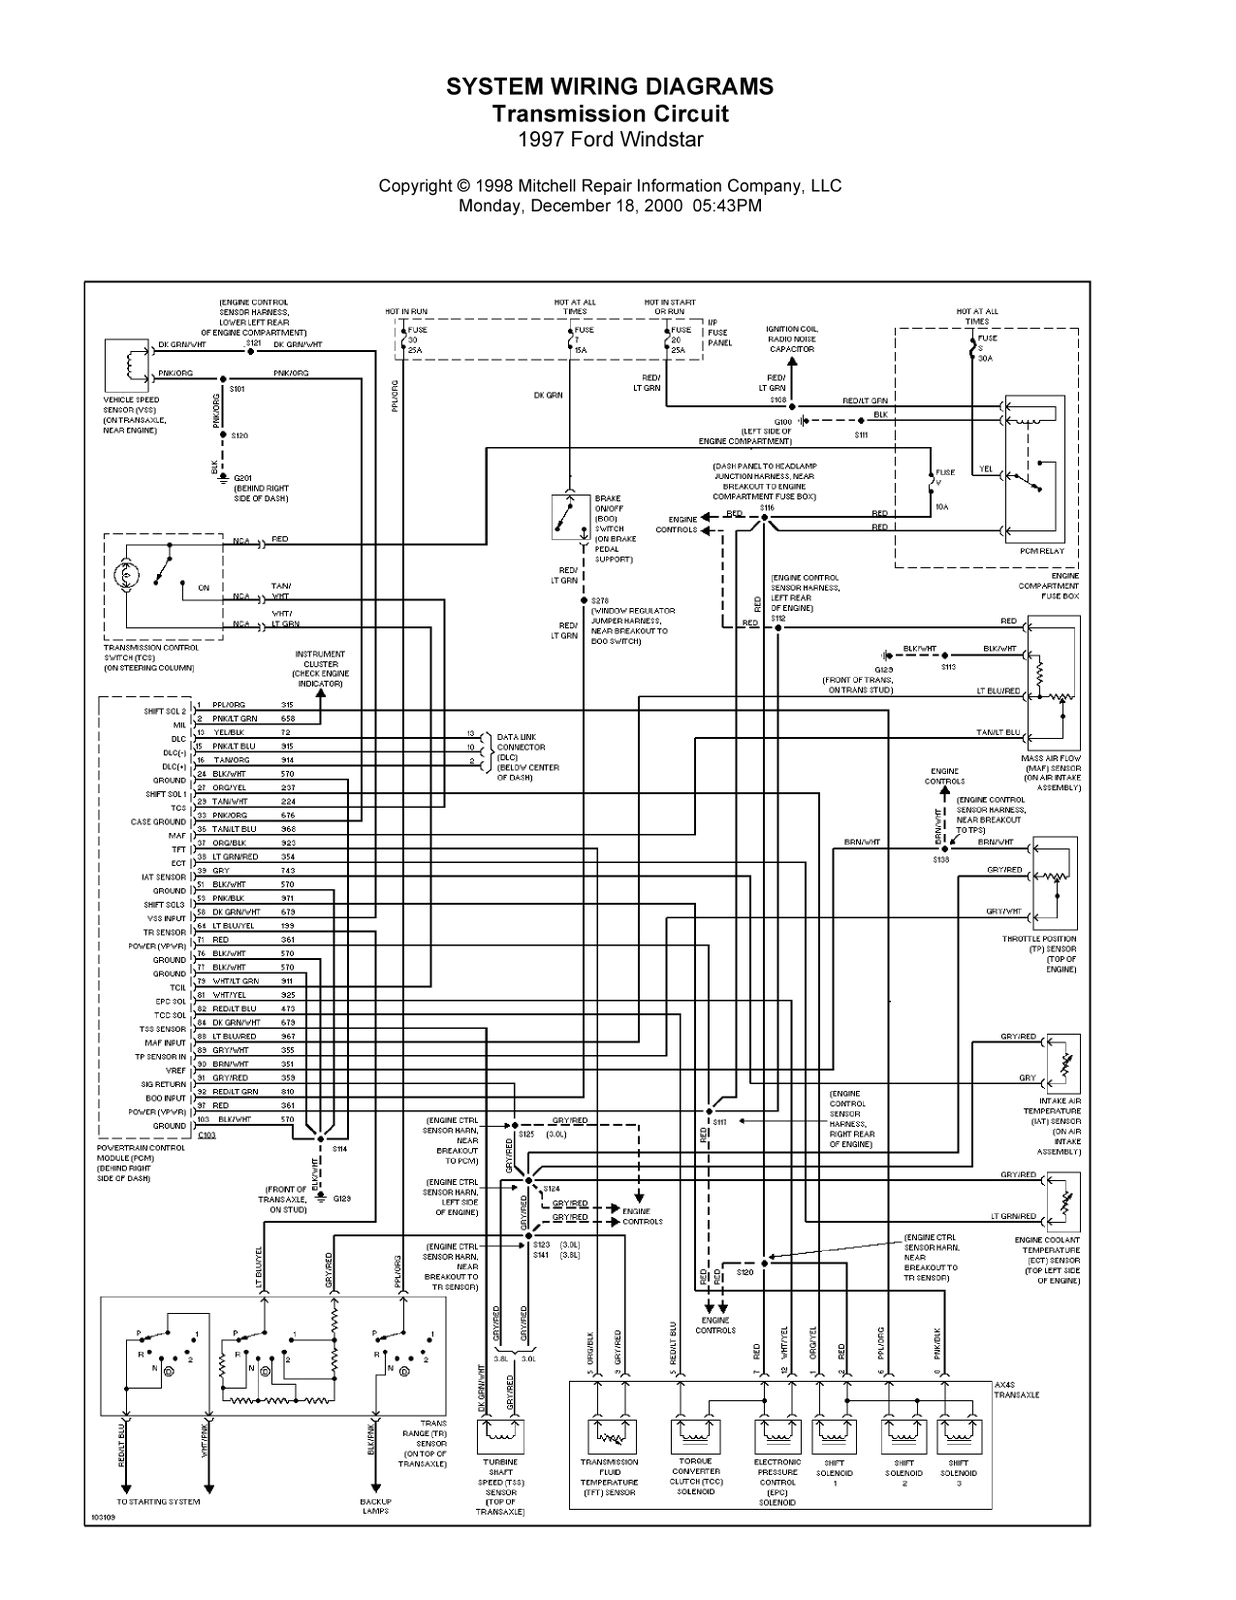 2007 Hummer H3 Stereo Wiring Diagram Car System Wiring Diagrams Diagram Base Website Wiring